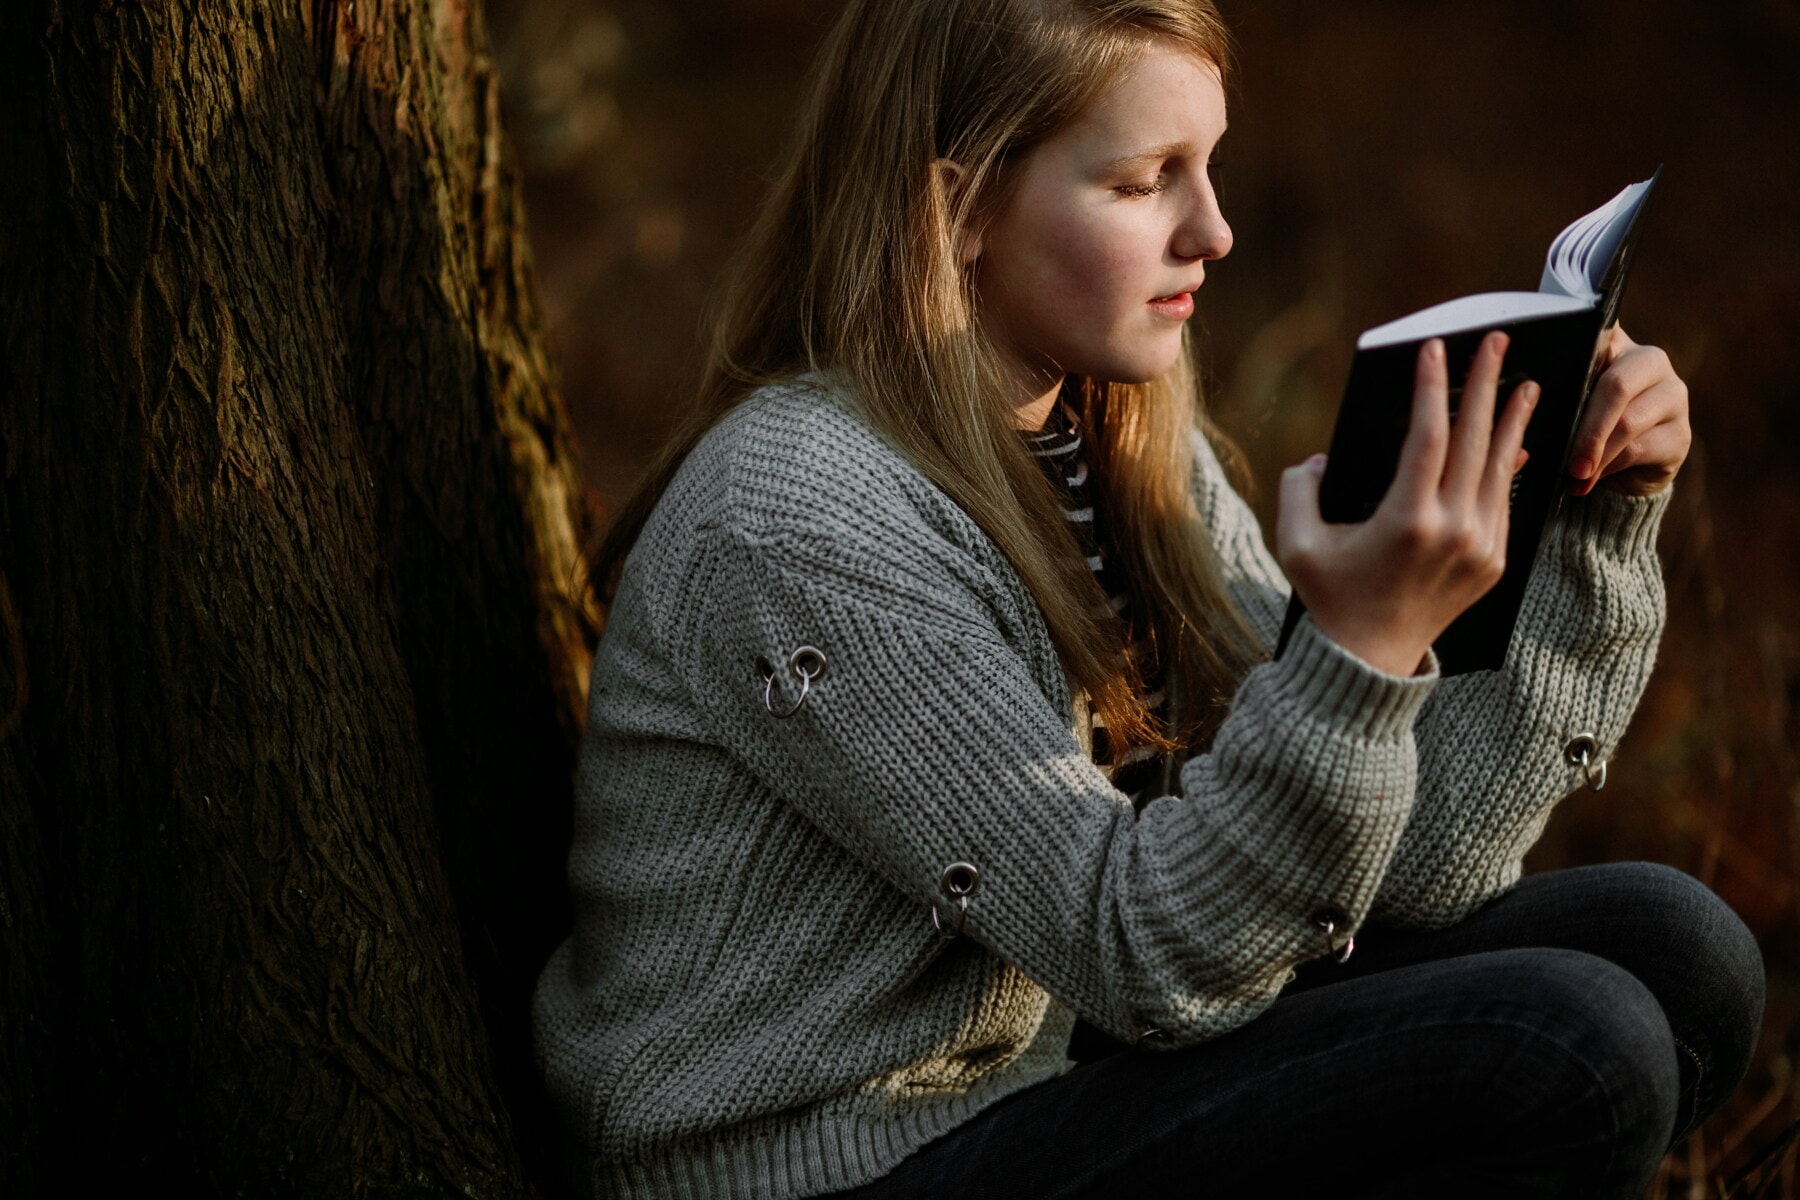 young woman, student, reading, book, tree, outdoor, outfit, sweater, knitwear, cardigan